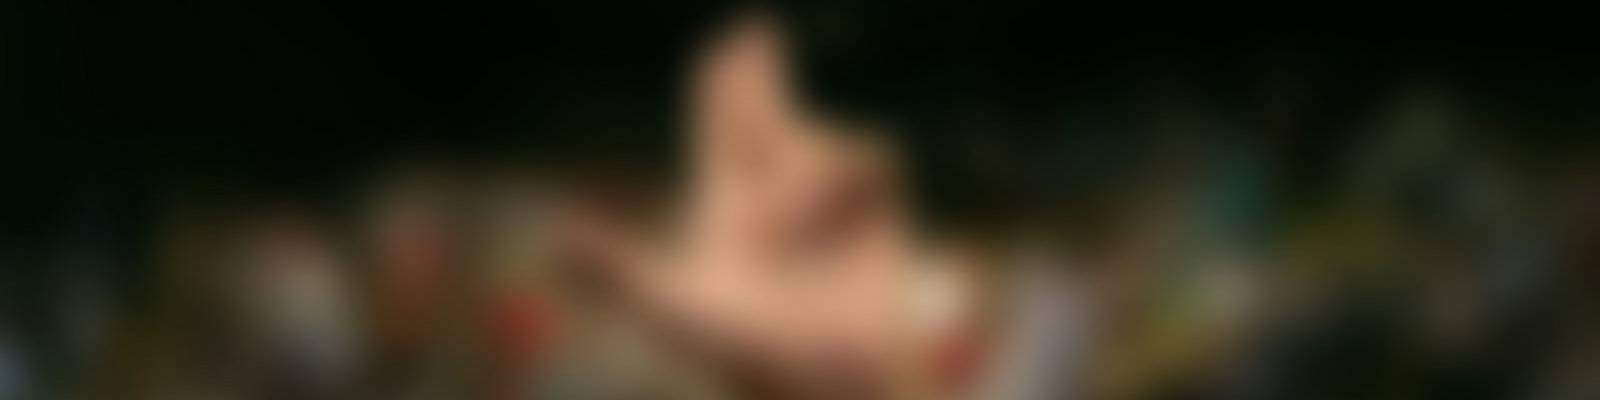 Blurred banner image of Texas State hand signs